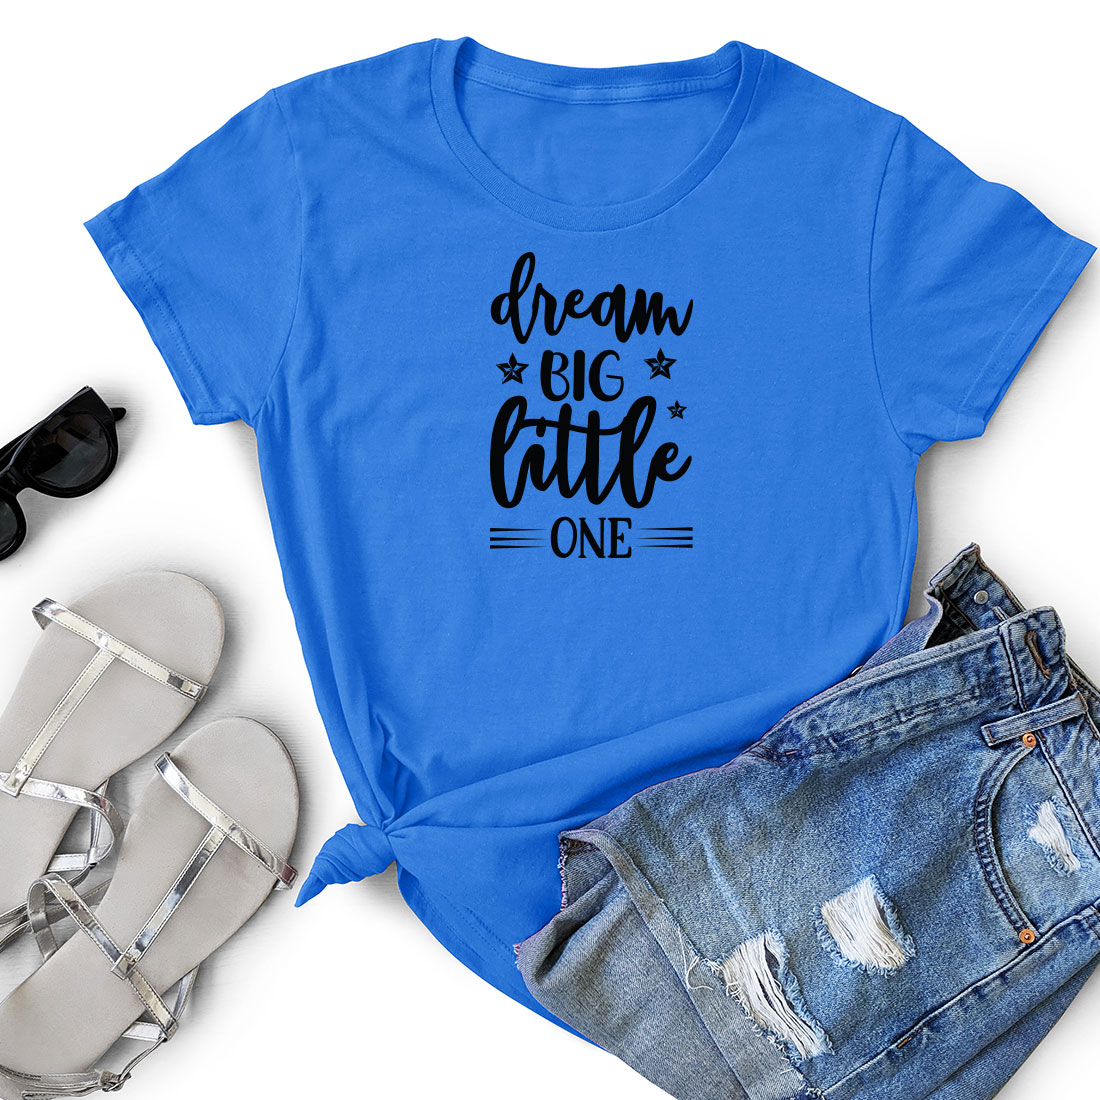 T - shirt that says dream big little one next to a pair of shorts.